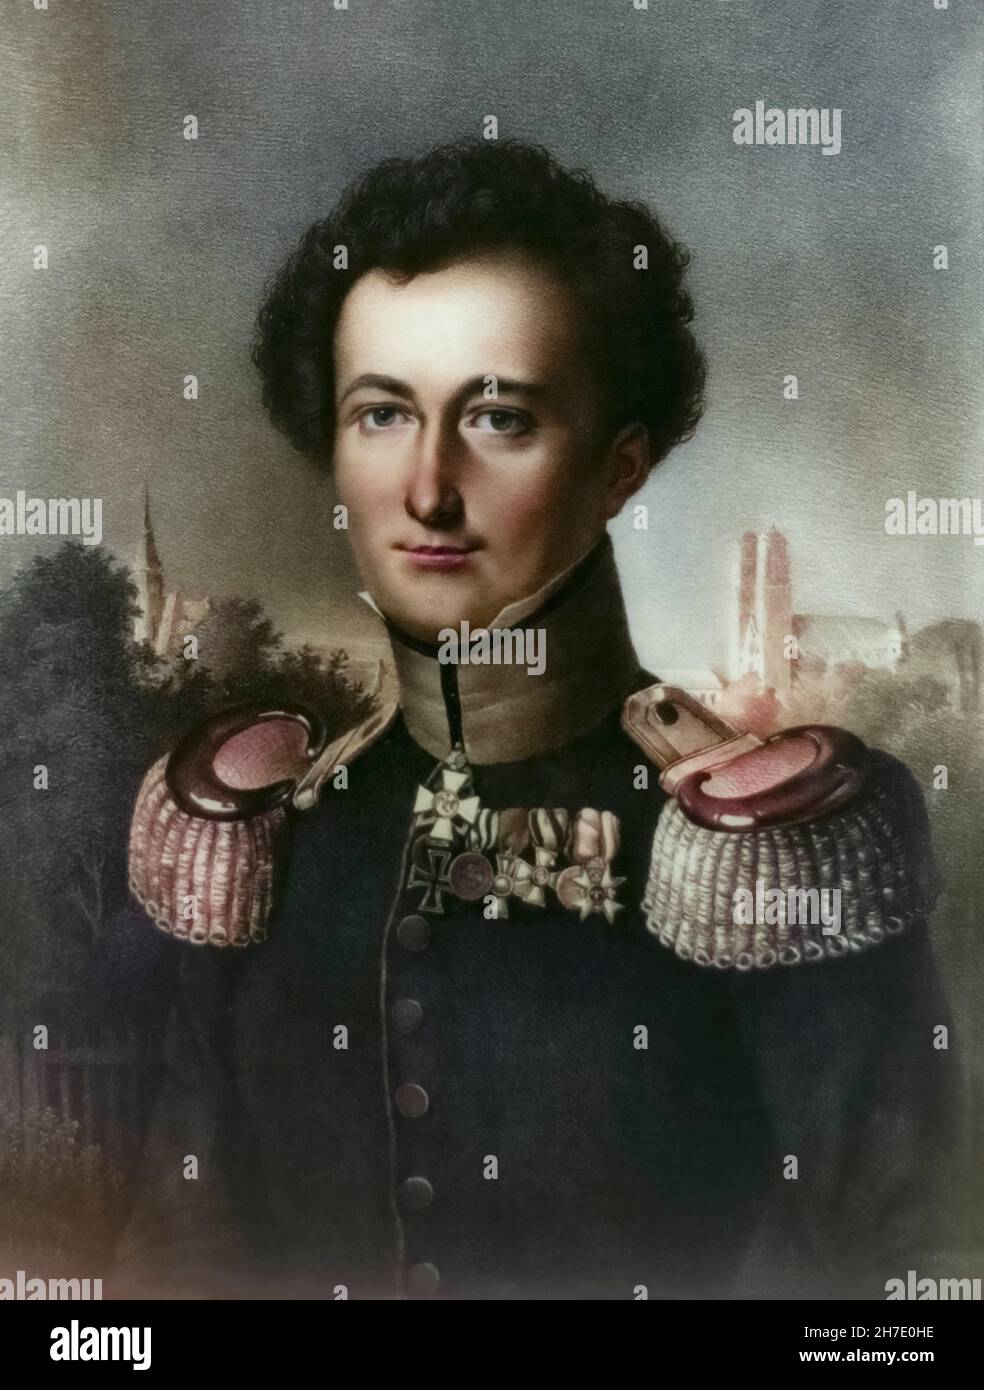 Carl Philipp Gottfried (or Gottlieb) von Clausewitz,  1780 – 1831.  Prussian general and military theorist.  Author of Vom Kriege, or On War.  After a painting by Karl Wilhelm Wach. Stock Photo